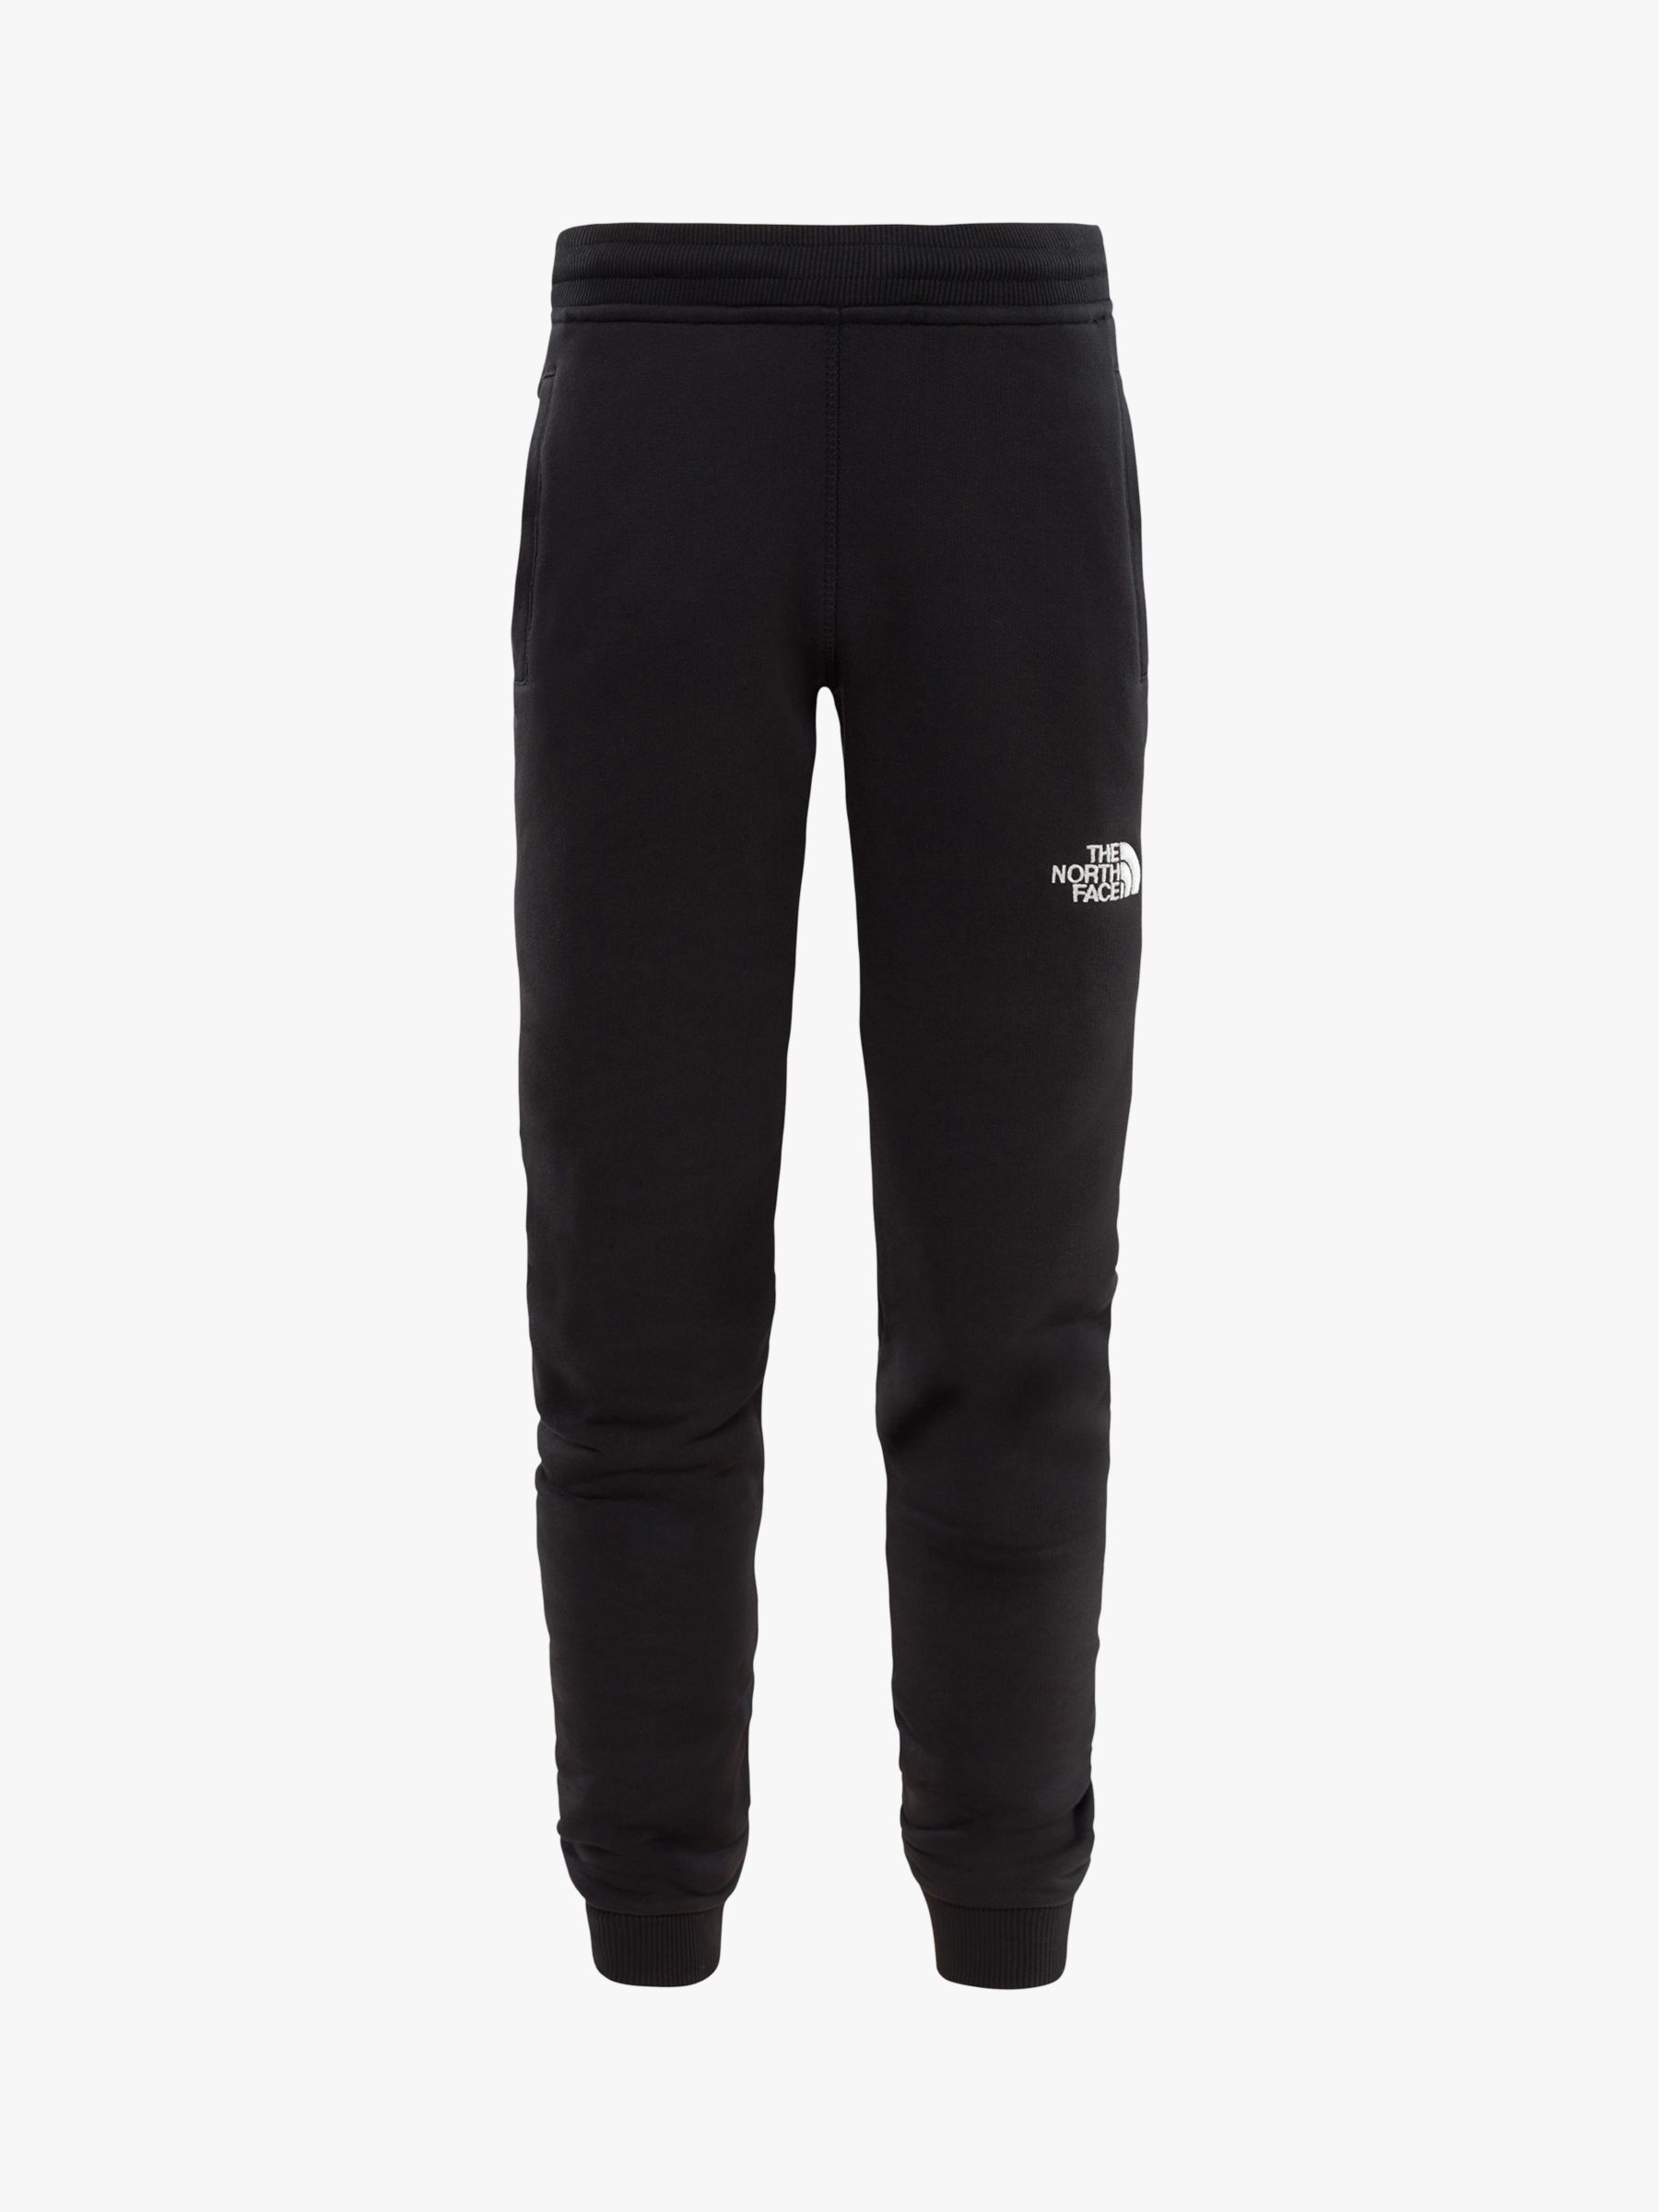 Image of The North Face Boys Fleece Joggers